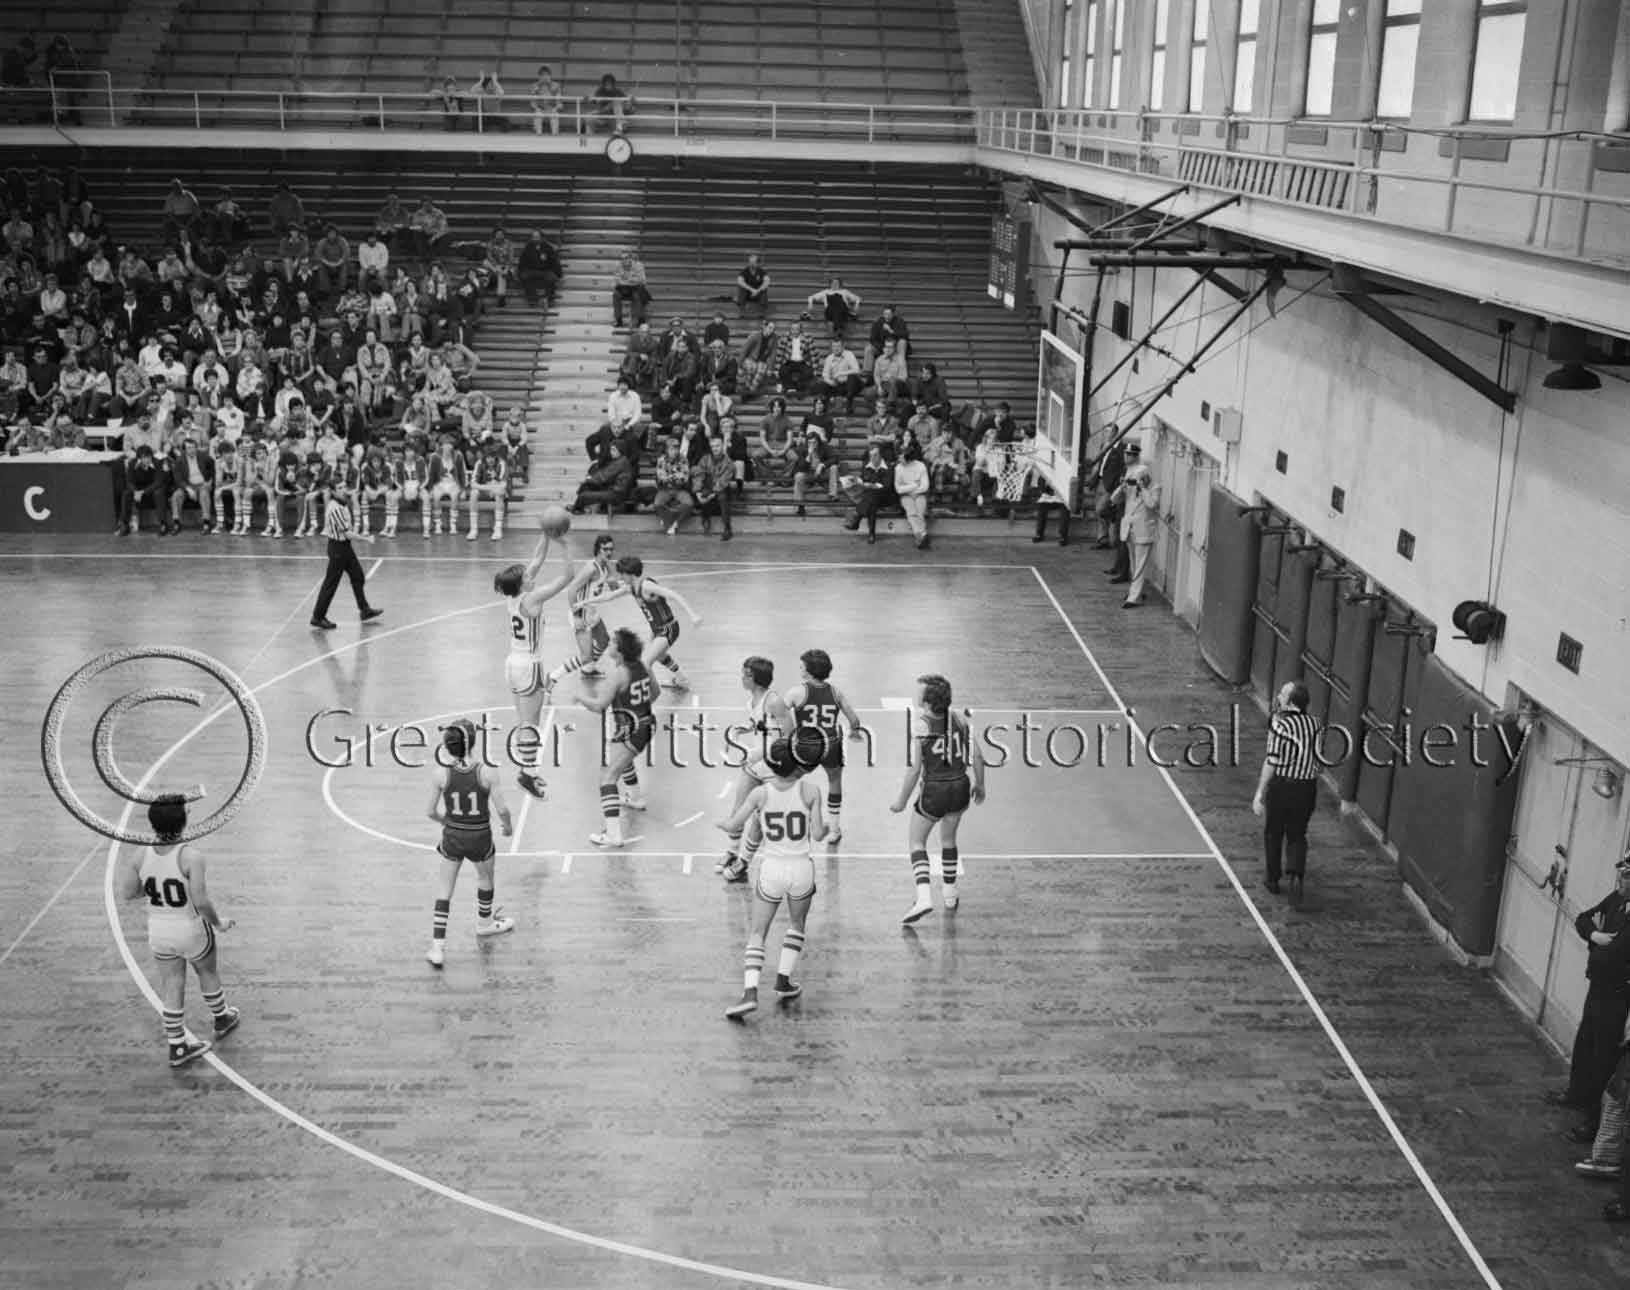 Pittston Area High School vs. Unknown Opponent (1976), Scranton, PA. Sunday Dispatch Photographic Collection (1976.1.1102), Greater Pittston Historical Society, Pittston, PA.